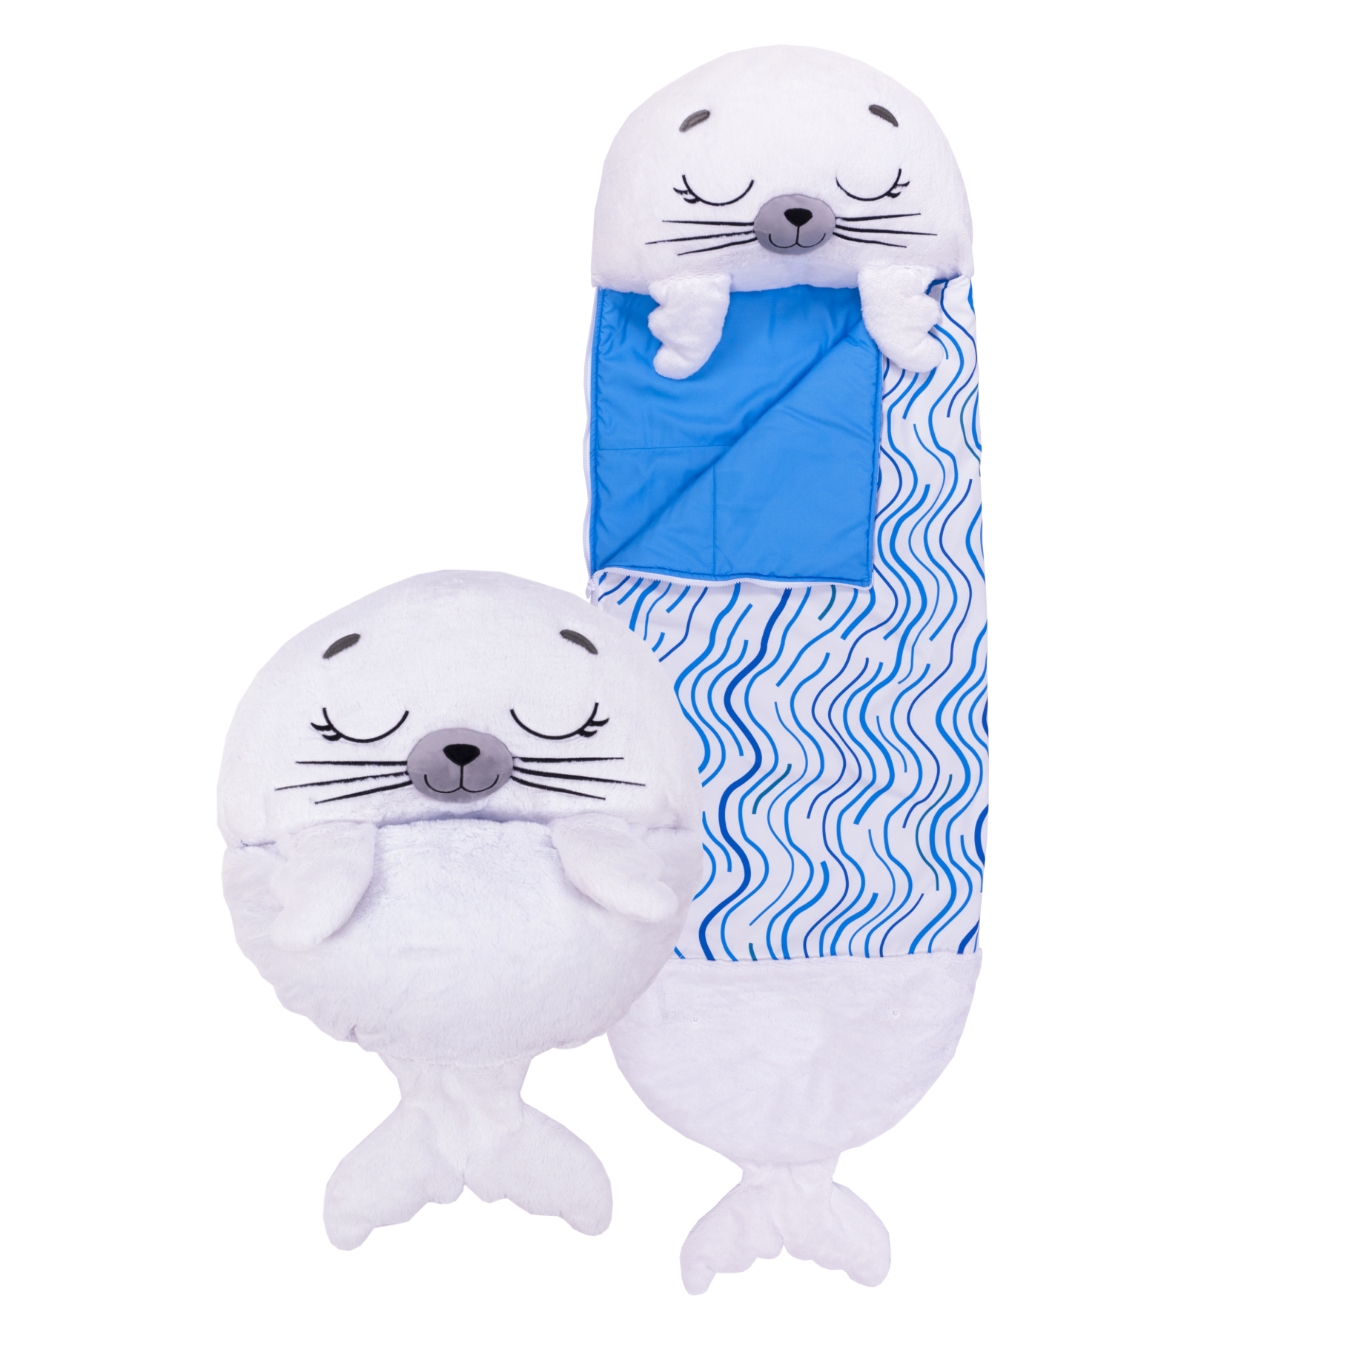 View Happy Nappers White Seal Large ages 7 information